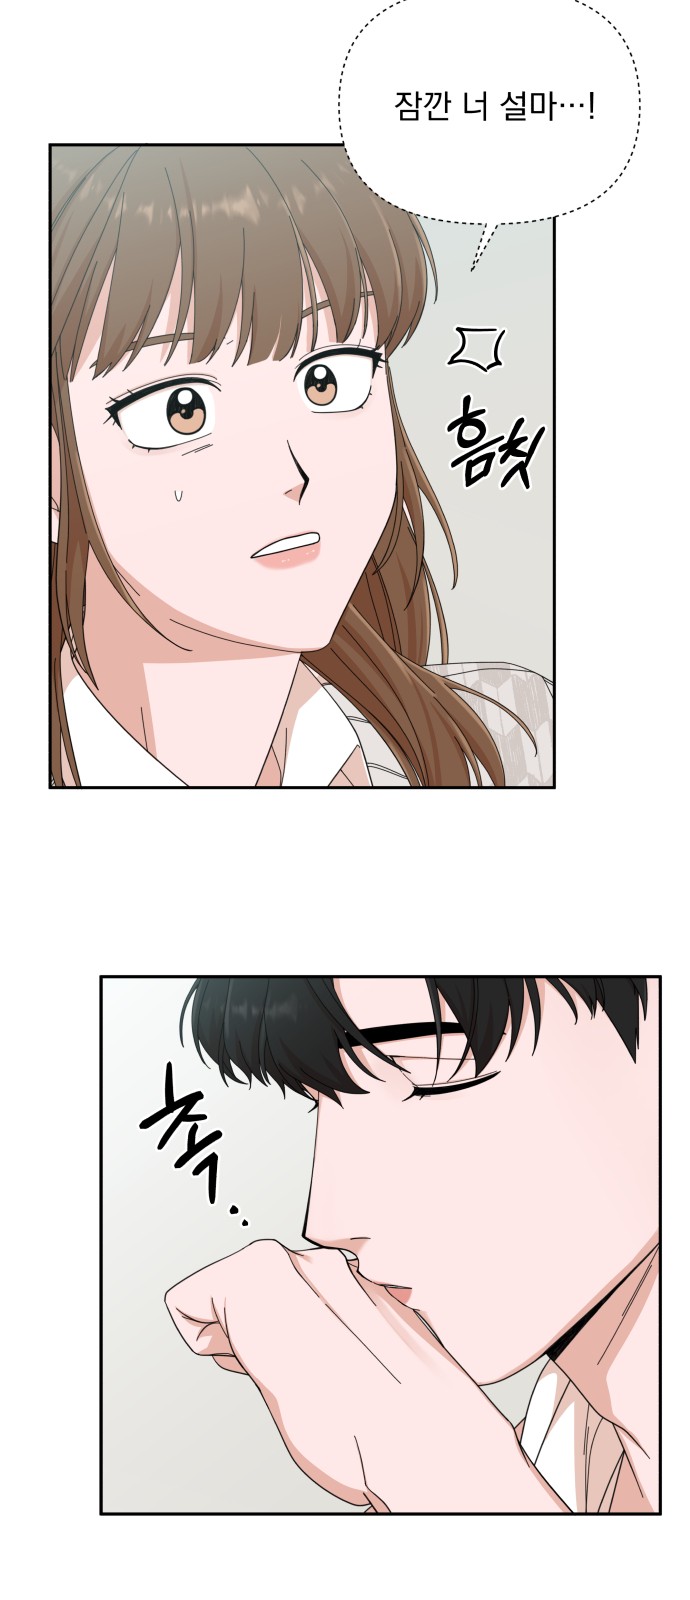 The Man With Pretty Lips - Chapter 9 - Page 3